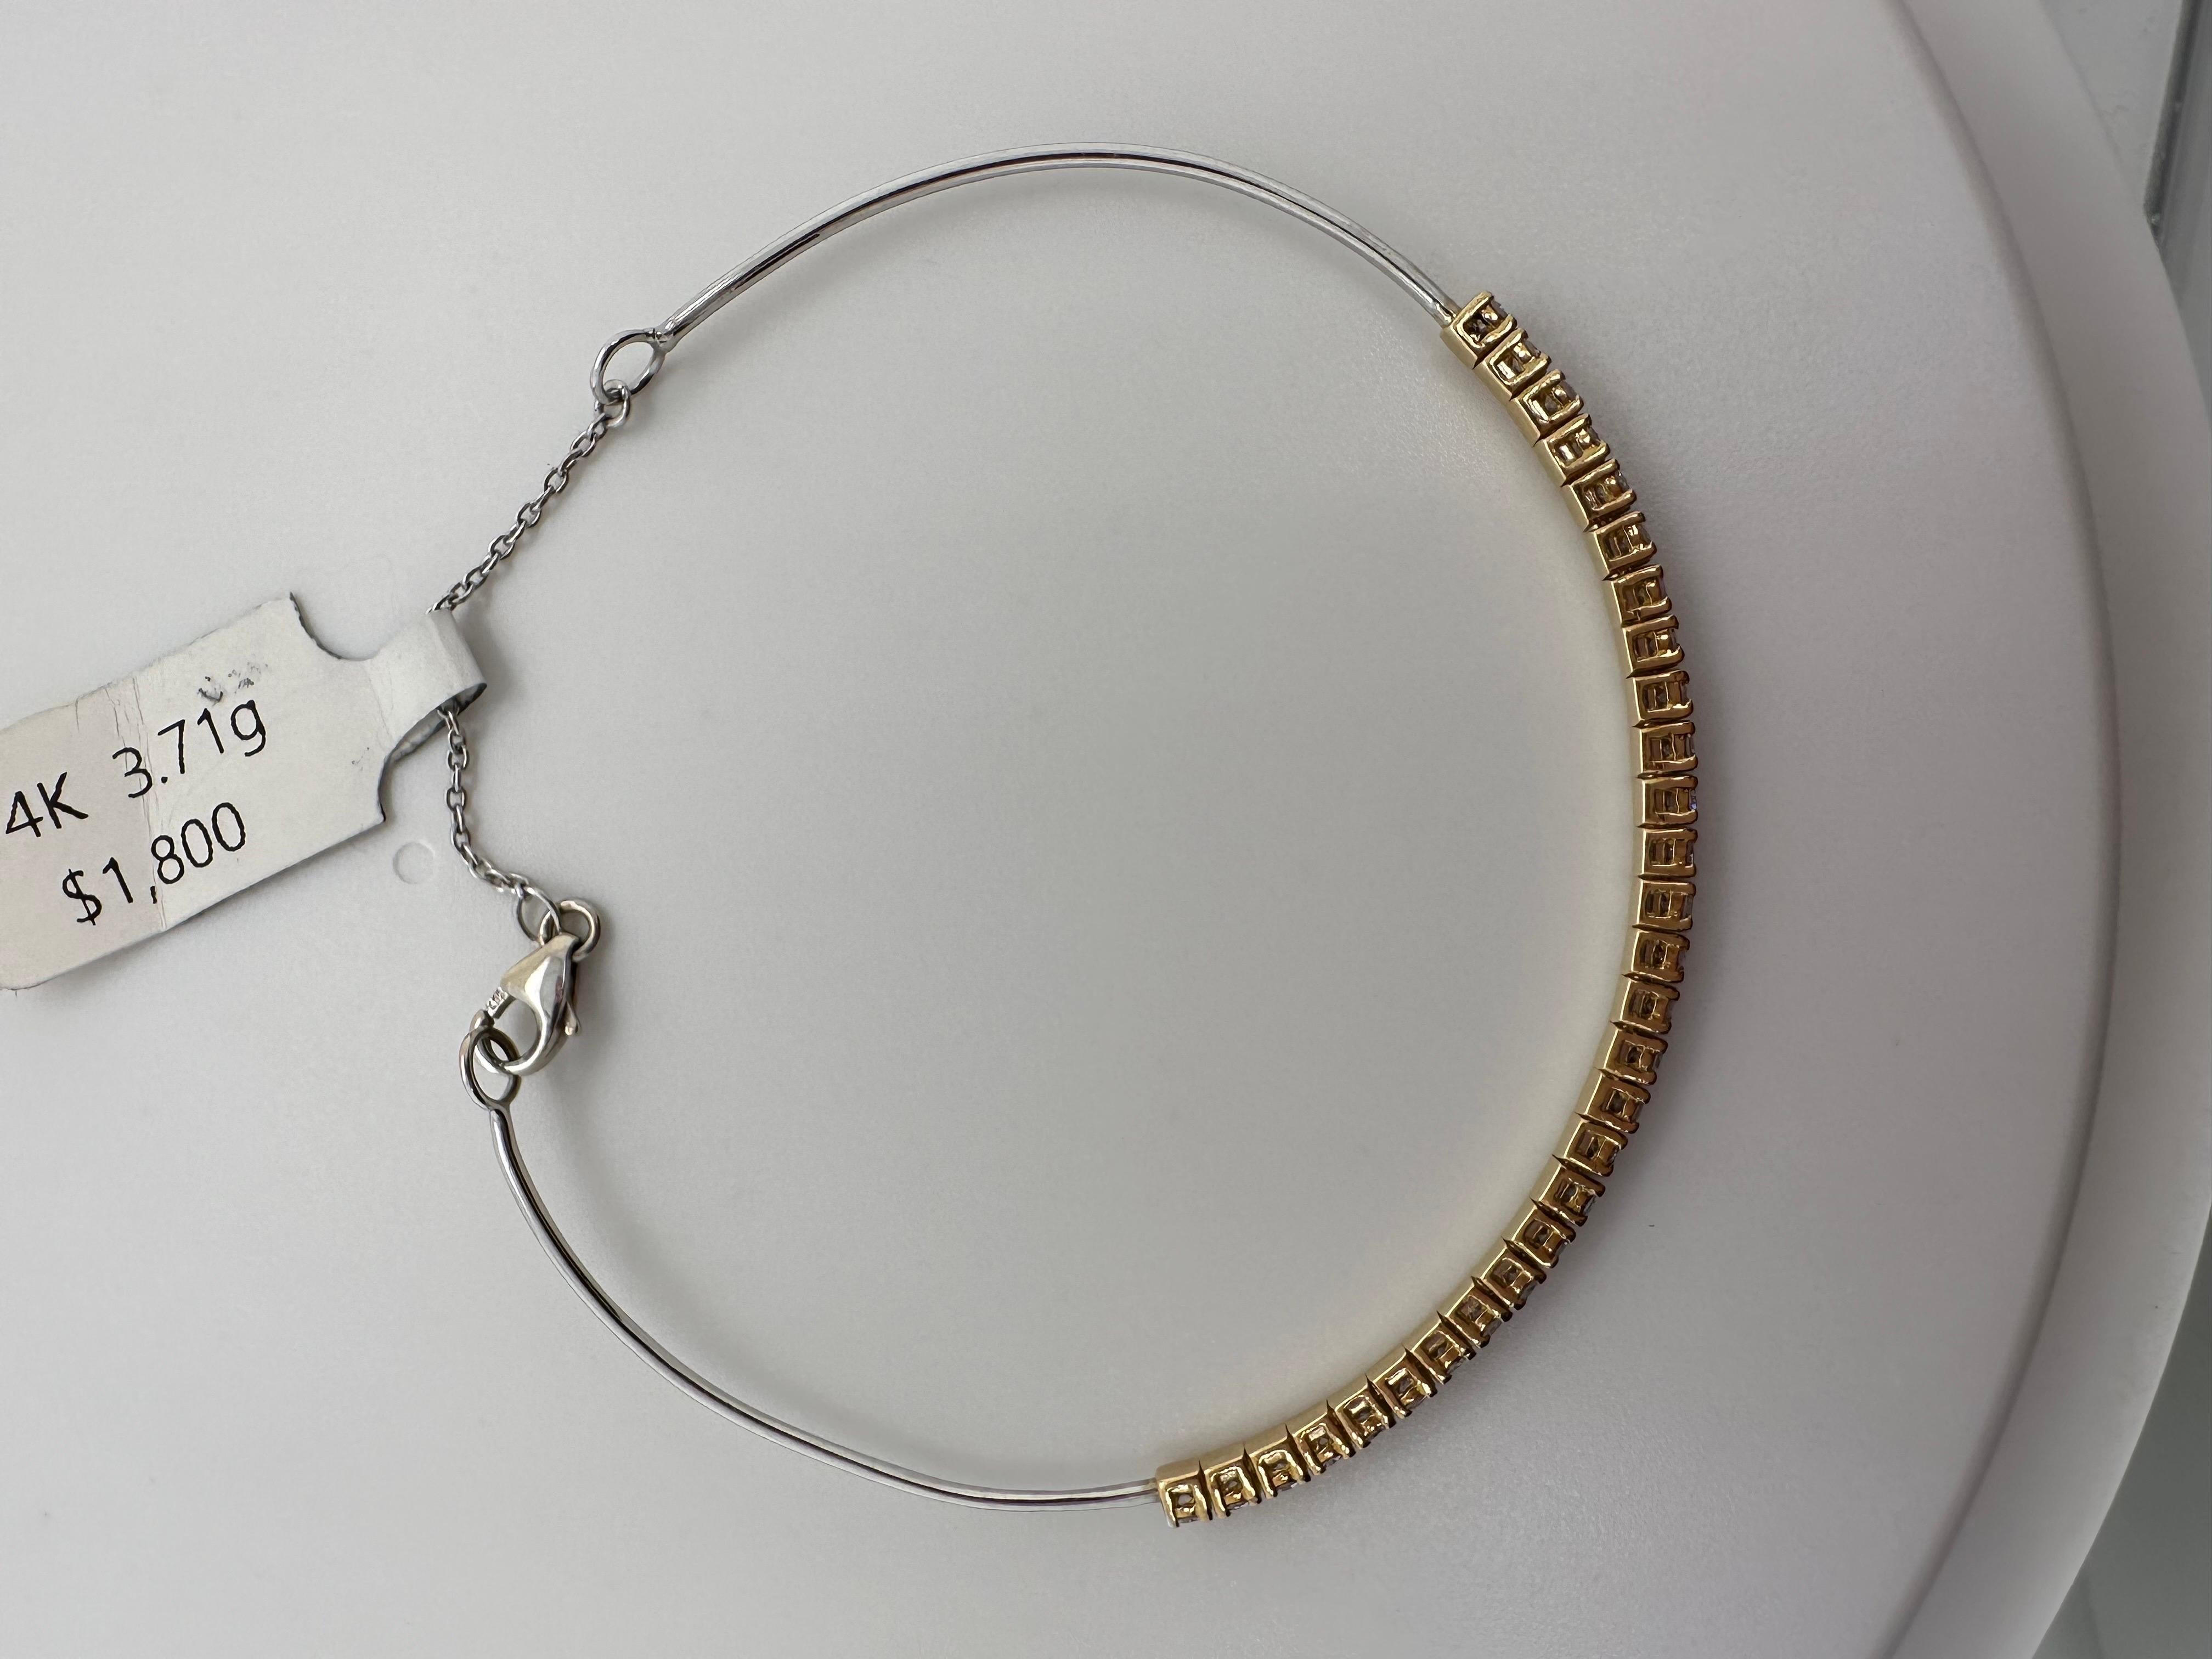 Flexible bangle bracelet with natural diamonds in 14KT gold!

Metal Type: 14KT
Gram Weight:3.71 grams 

Natural Diamond(s): 
Color: G
Cut:Round Brilliant
Carat: 0.45ct
Clarity: VS-SI (average)
Item: T1800
Certificate of authenticity comes with